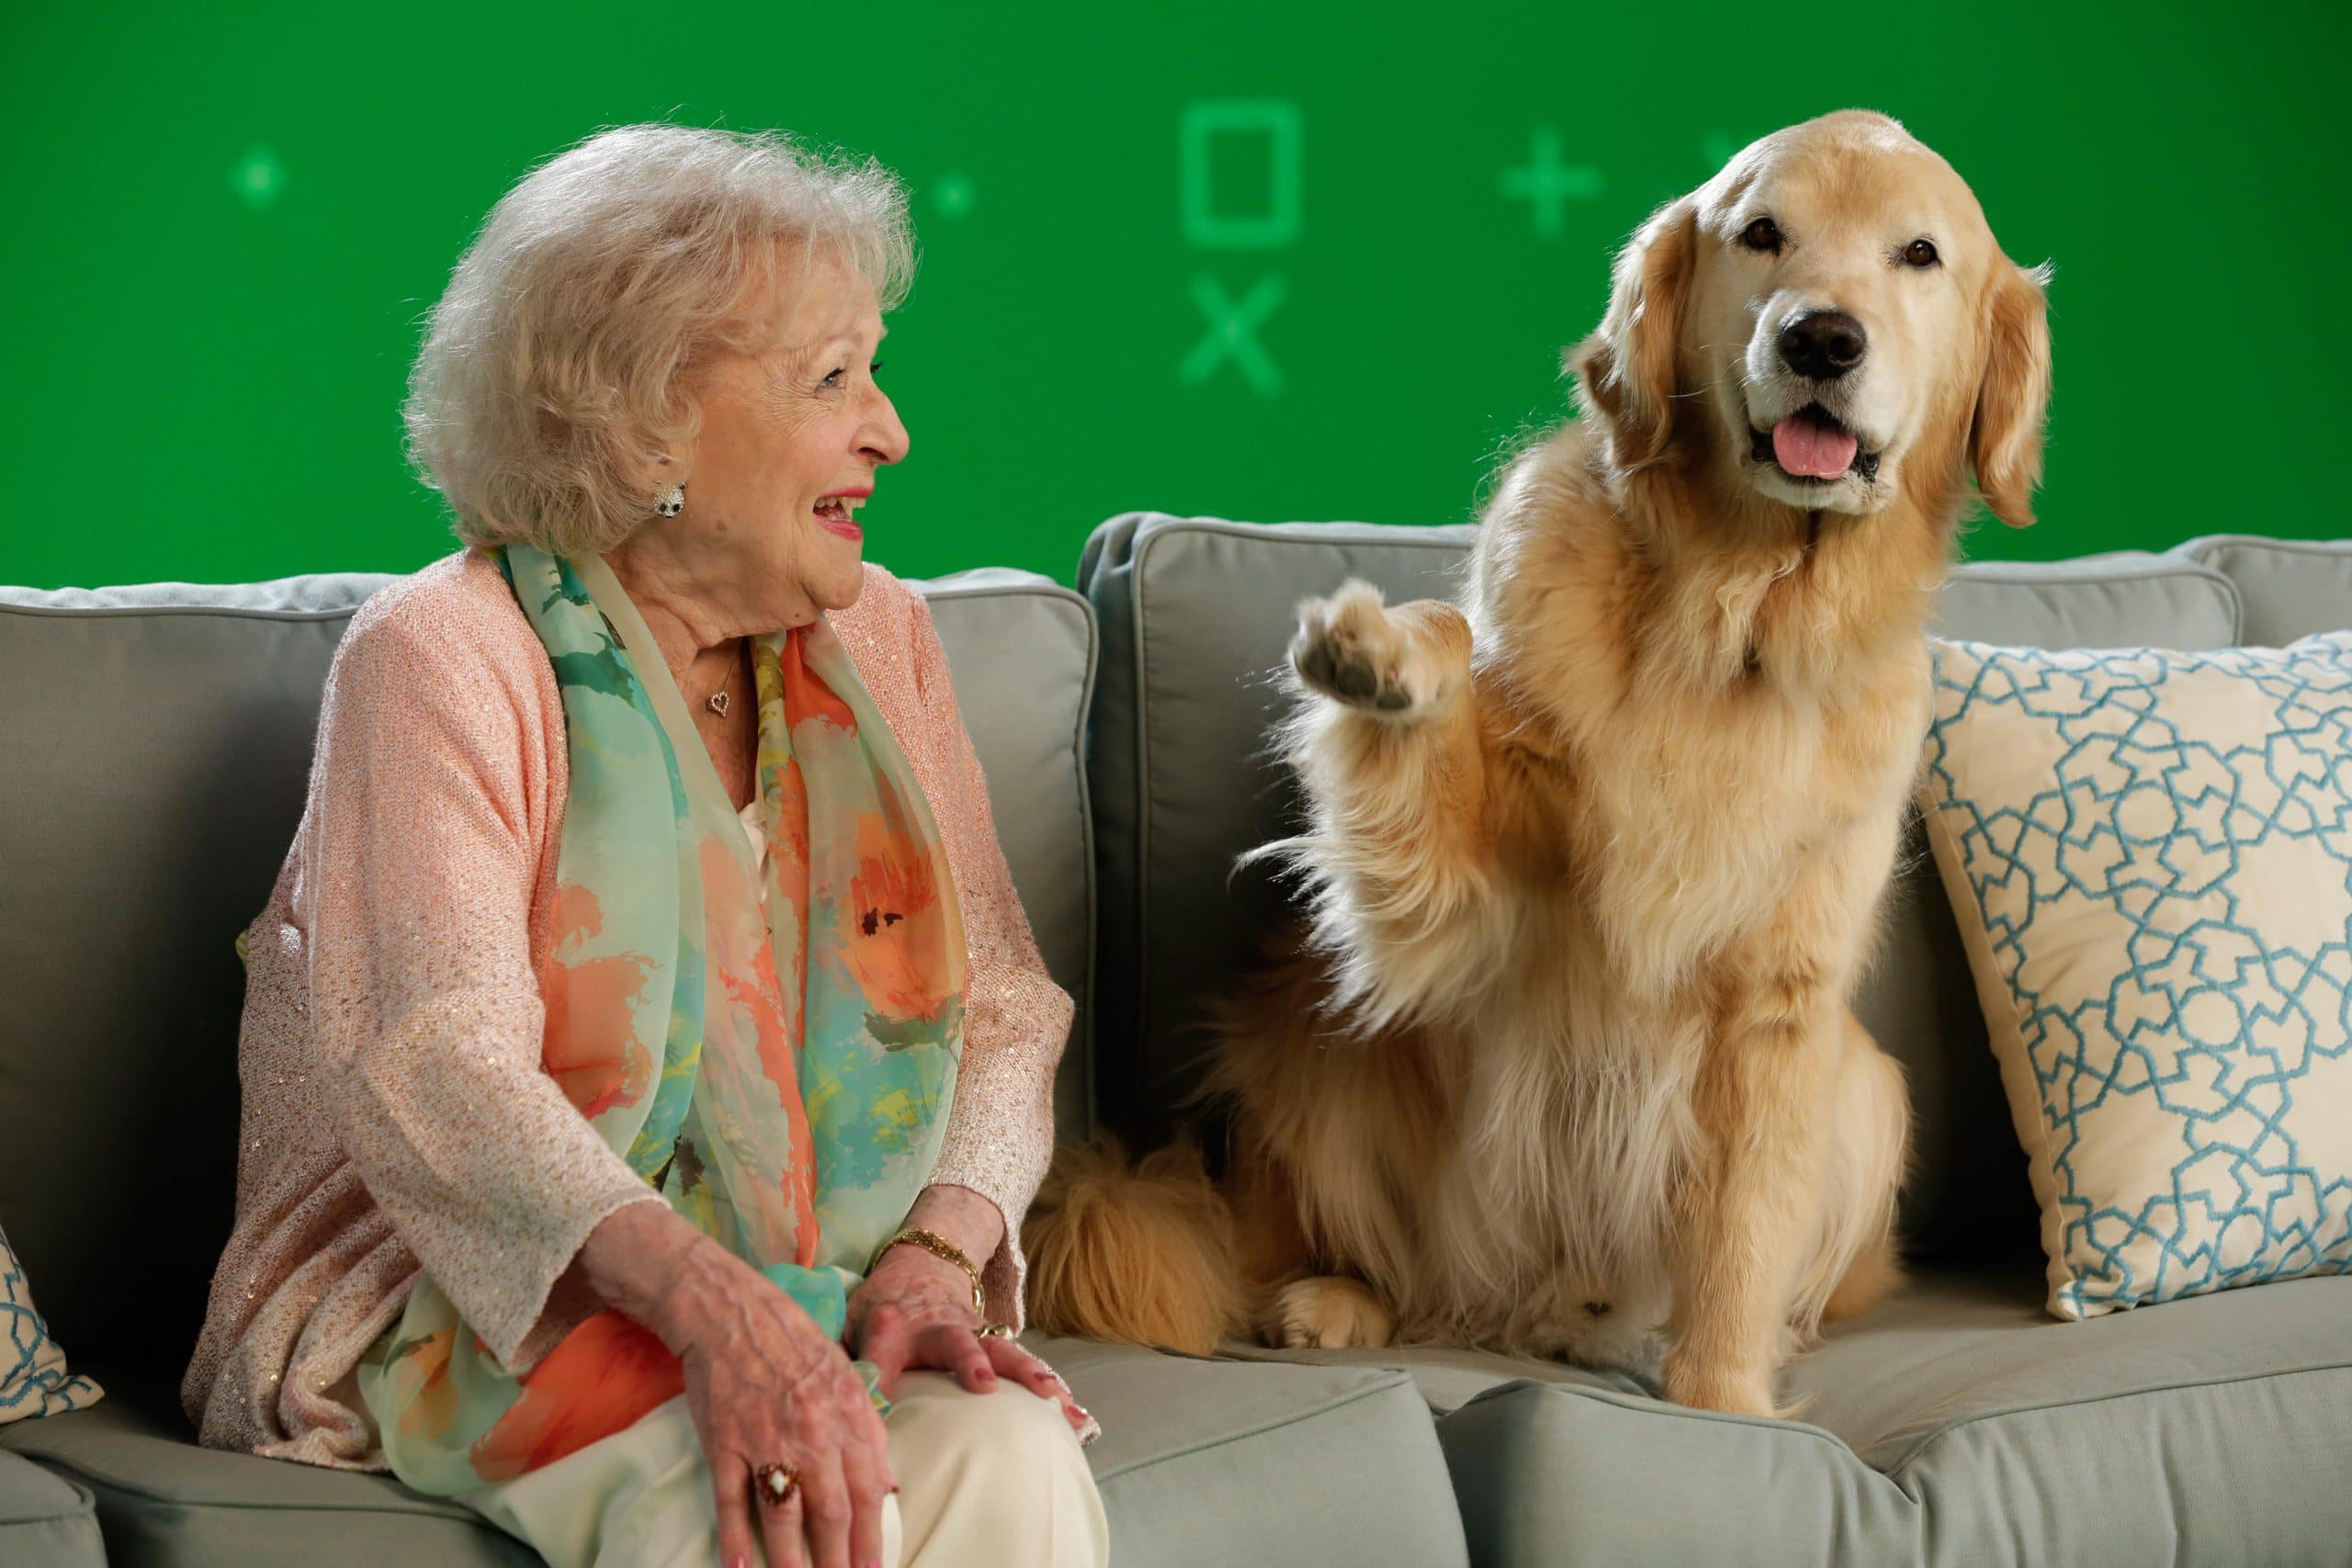 PAWGUST, (from left): host Betty White, Auggie the dog, (airs throughout Aug. 2015)